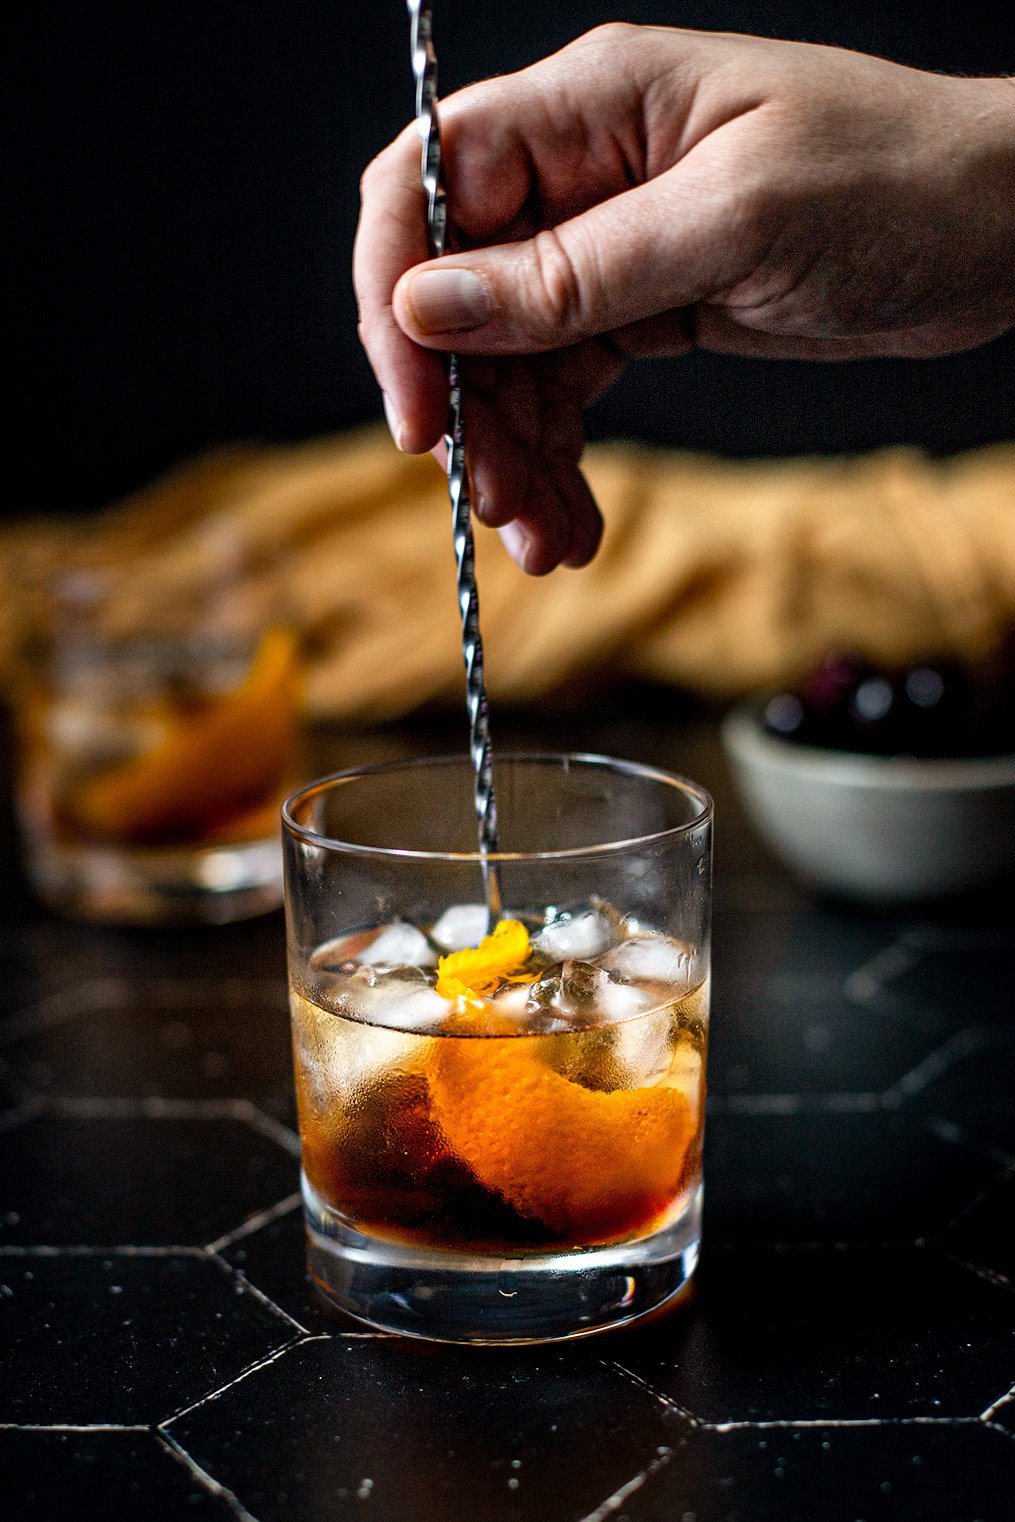 a maple old fashioned on a black tile background, a hand is stirring the cocktail with a bar spoon